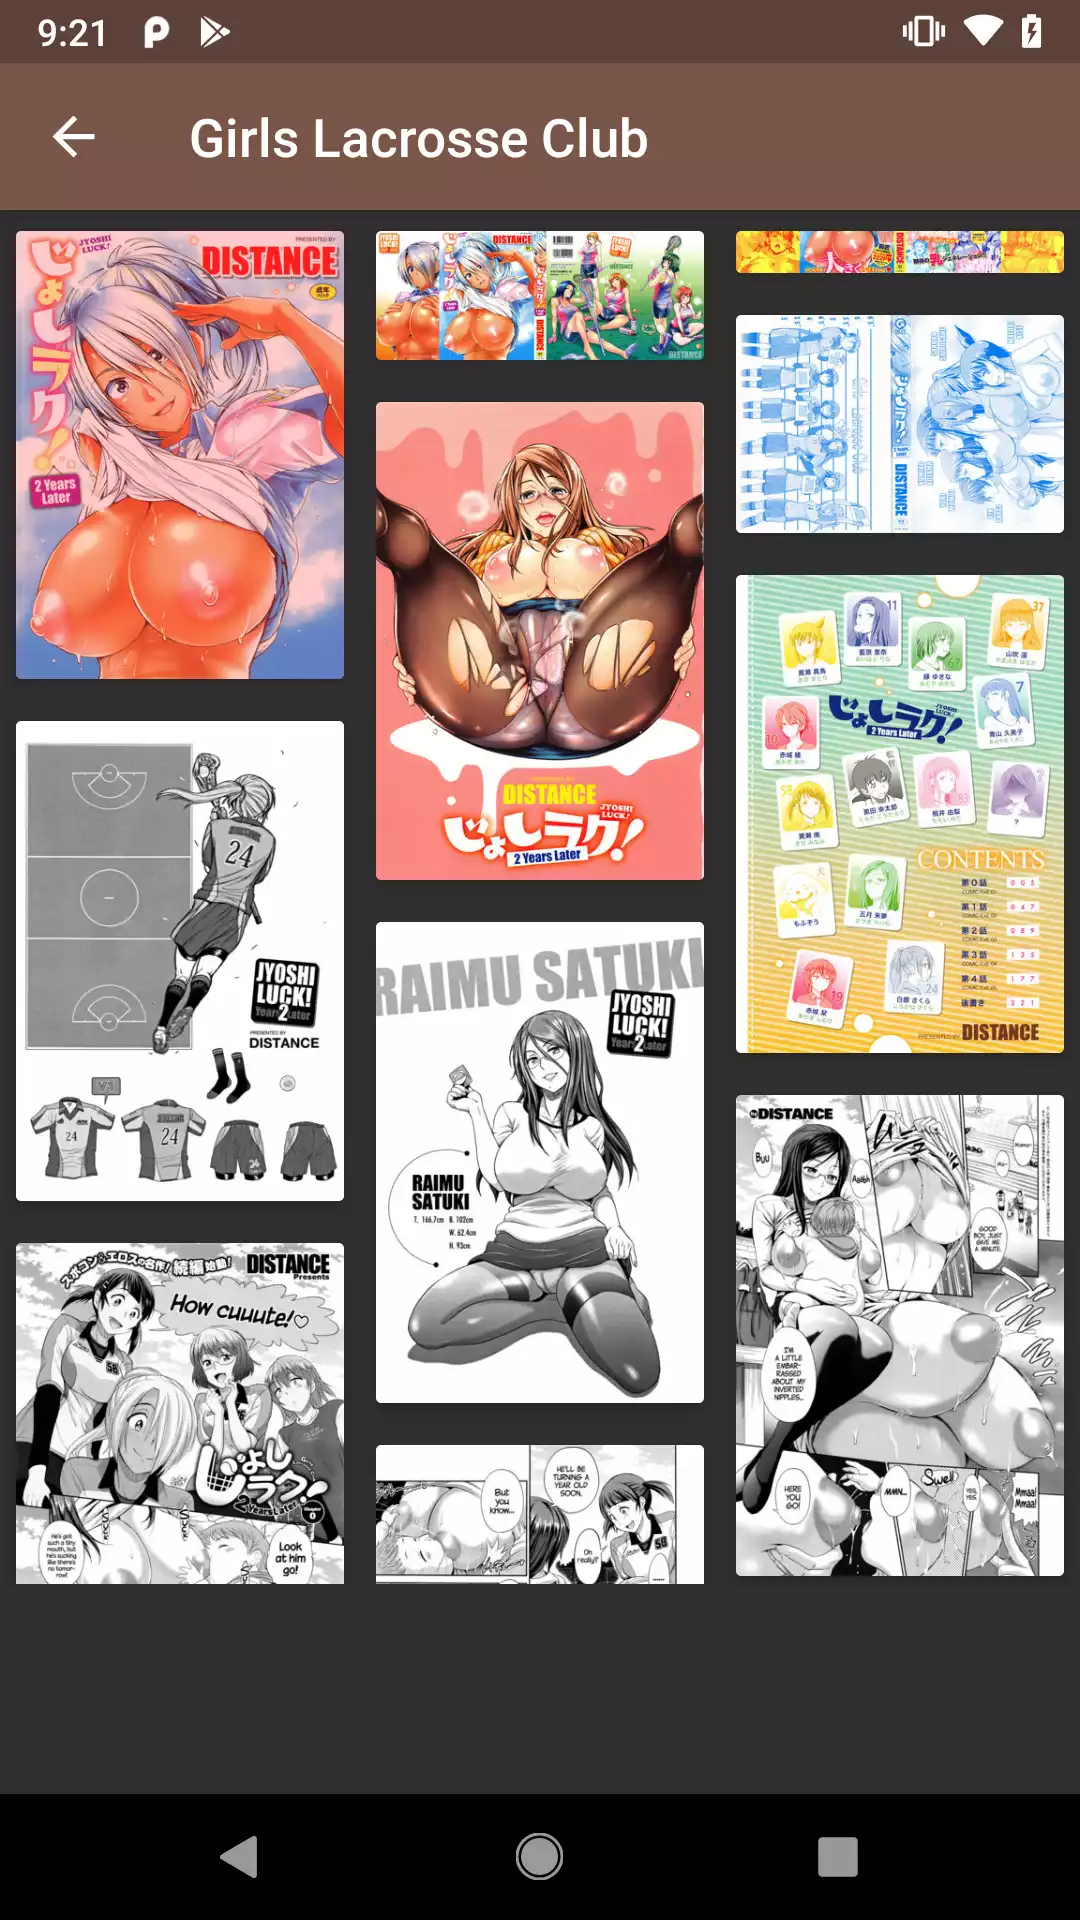 Girls Lacrosse Club apk,picture,collection,wallpaper,top,apps,hentai,topless,pornstar,hantai,download,porn,images,hot,photo,android,sexy,app,comics,pocs,for,nude,pics,manga